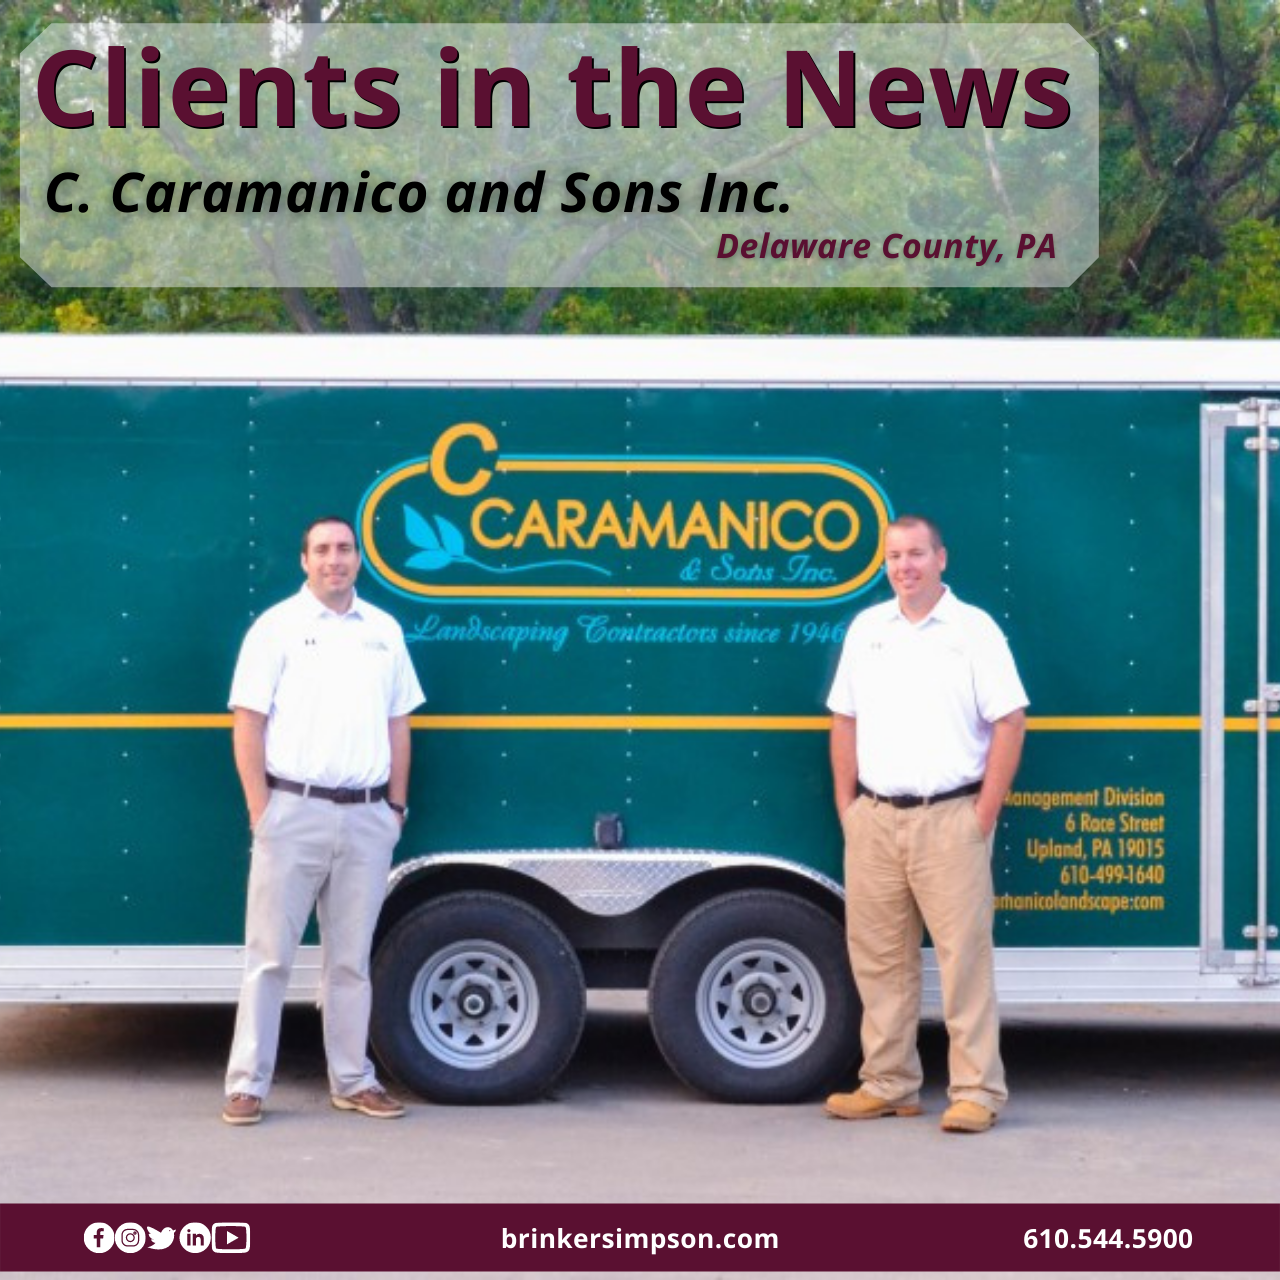 Clients in the News: C. Caramanico & Sons, Inc.